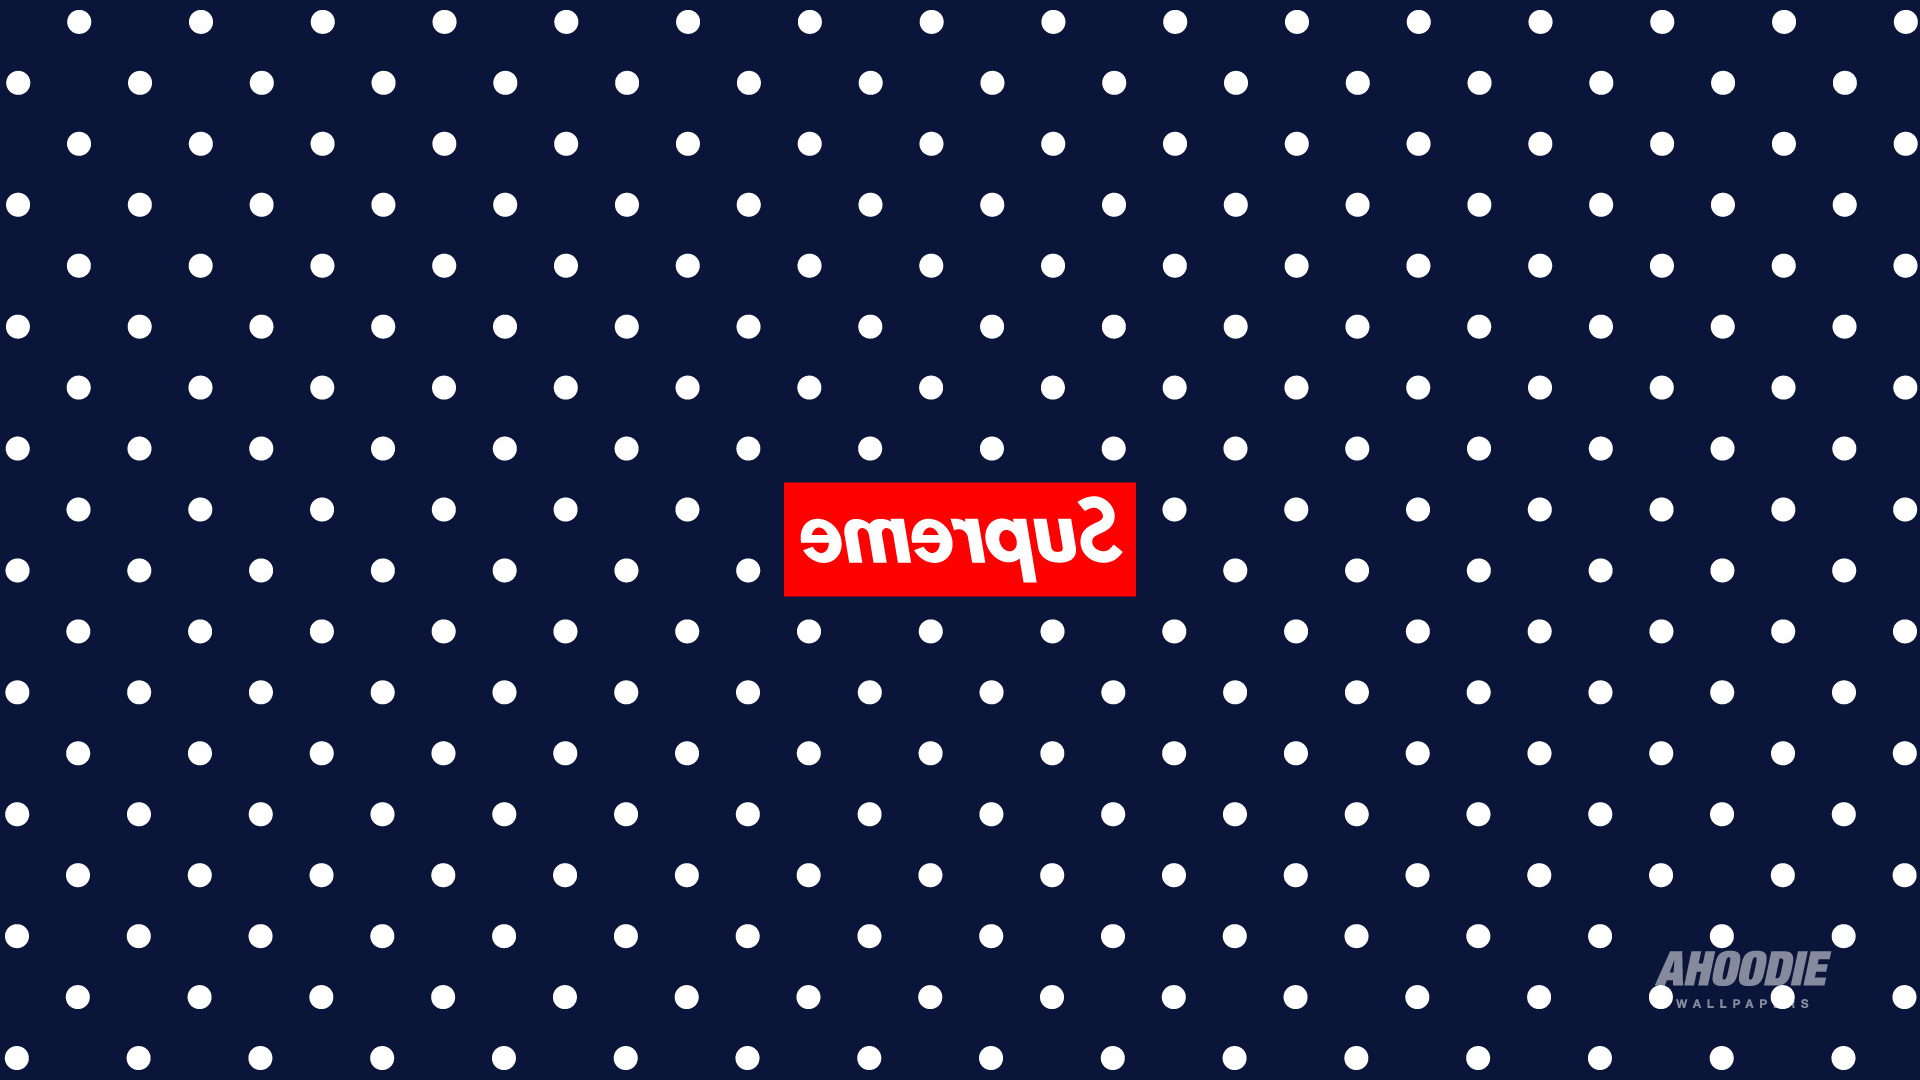 New Supreme Polka Dot Pattern For Iphone And id 170874 BUZZERG